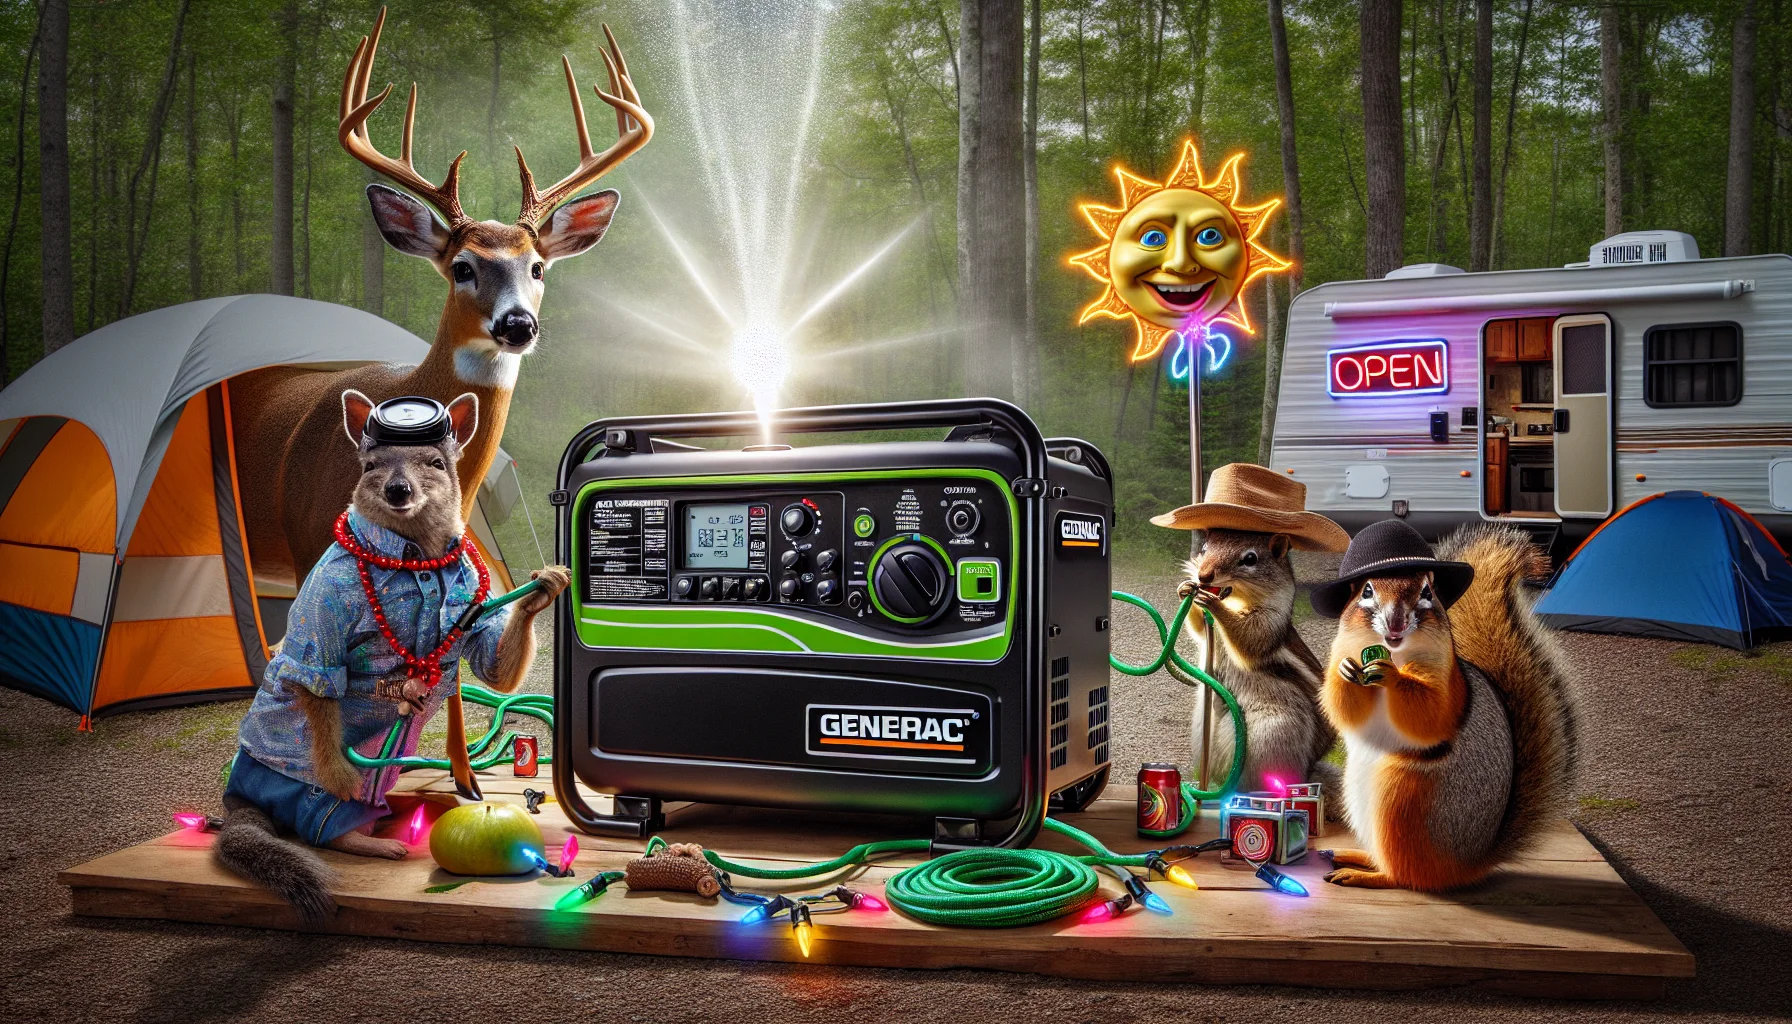 Generate a humorous and enticing image featuring a Generac RV generator. Set in a rustic camping ground, the generator is surrounded by woodland creatures: a deer wearing a miner's hat, a squirrel with a neon 'OPEN' sign, and a raccoon with a string of vibrant Christmas lights. The generator operates with a dazzling light emitting from it, suggesting it's providing power to their party in the woods. Add an anthropomorphic sun in the corner of the image, smiling and giving a thumbs up. This wacky scene effectively communicates the idea of generating your own electricity.